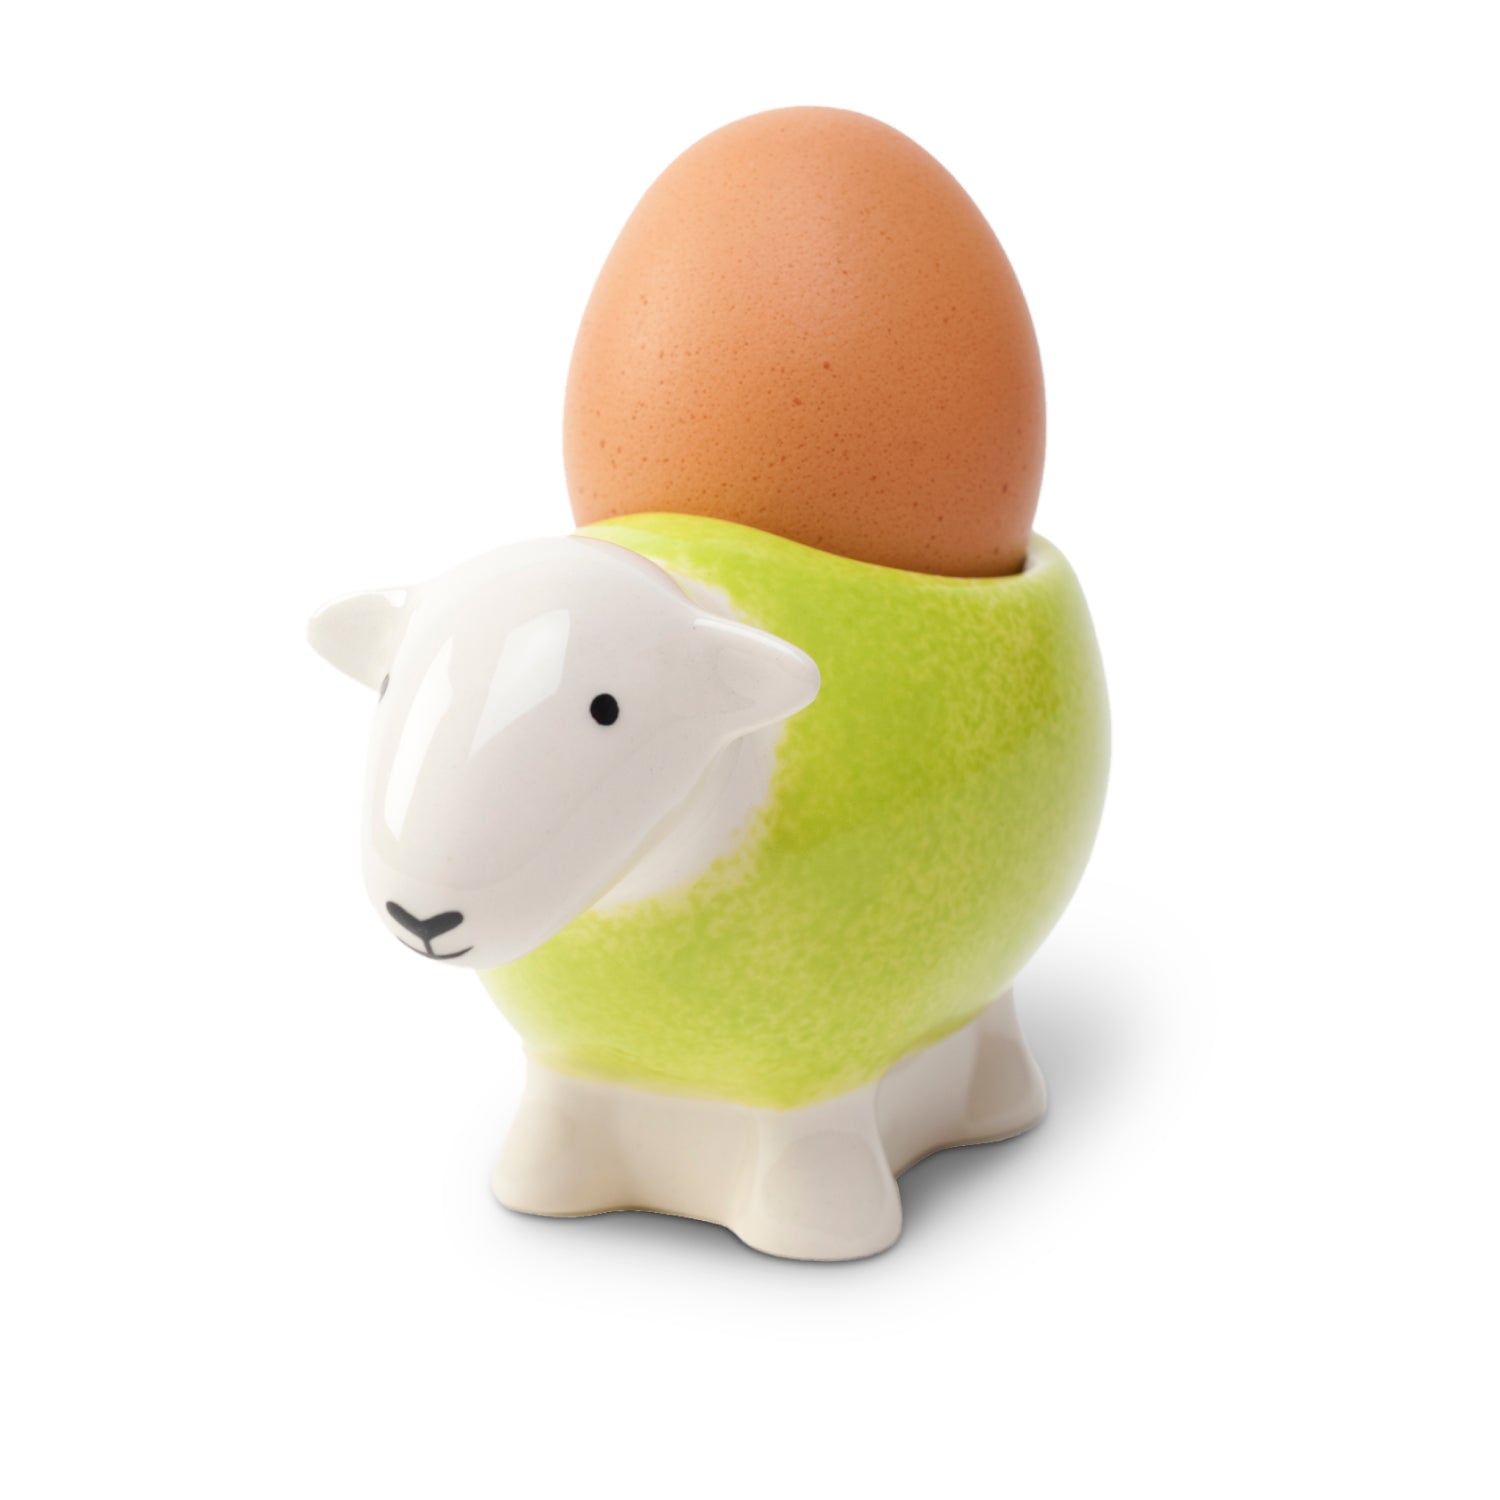 Herdy Egg Cup (Green)